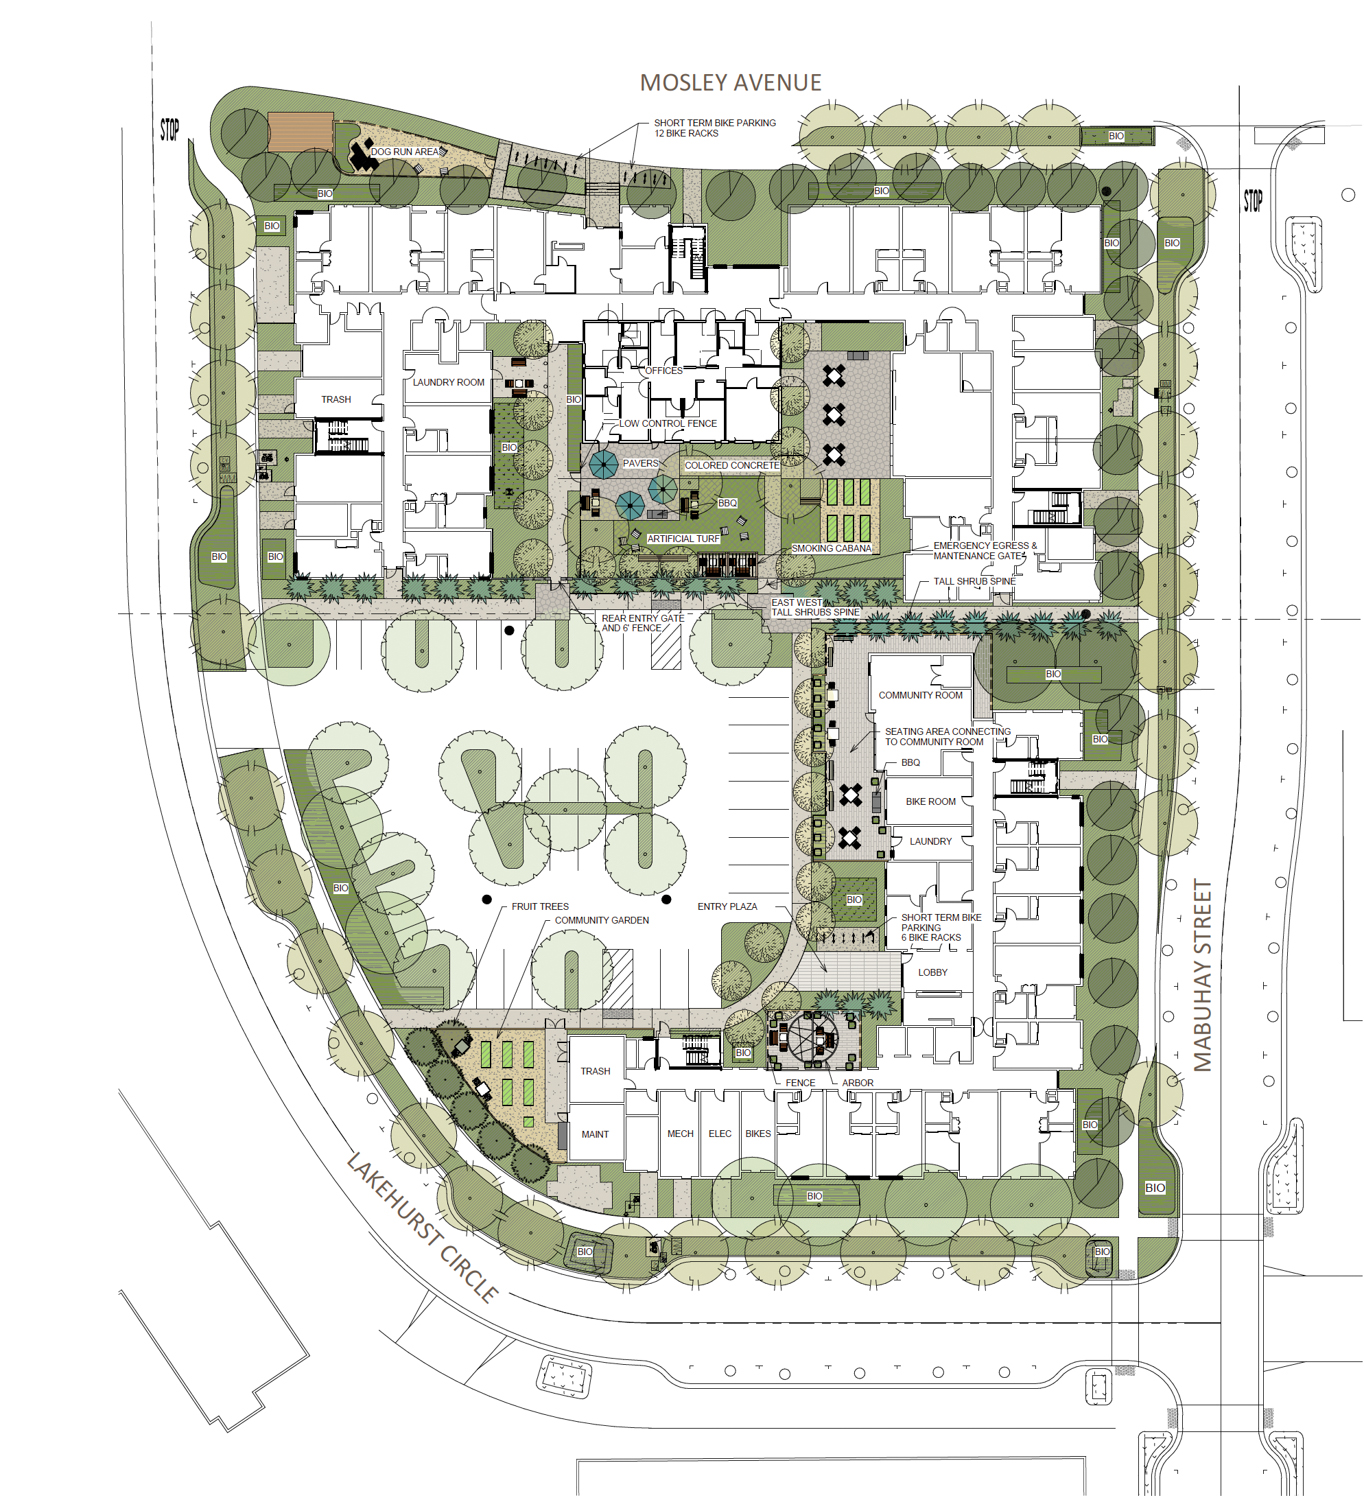 North Housing Block A landscape design master plan, rendering by HKIT Architects